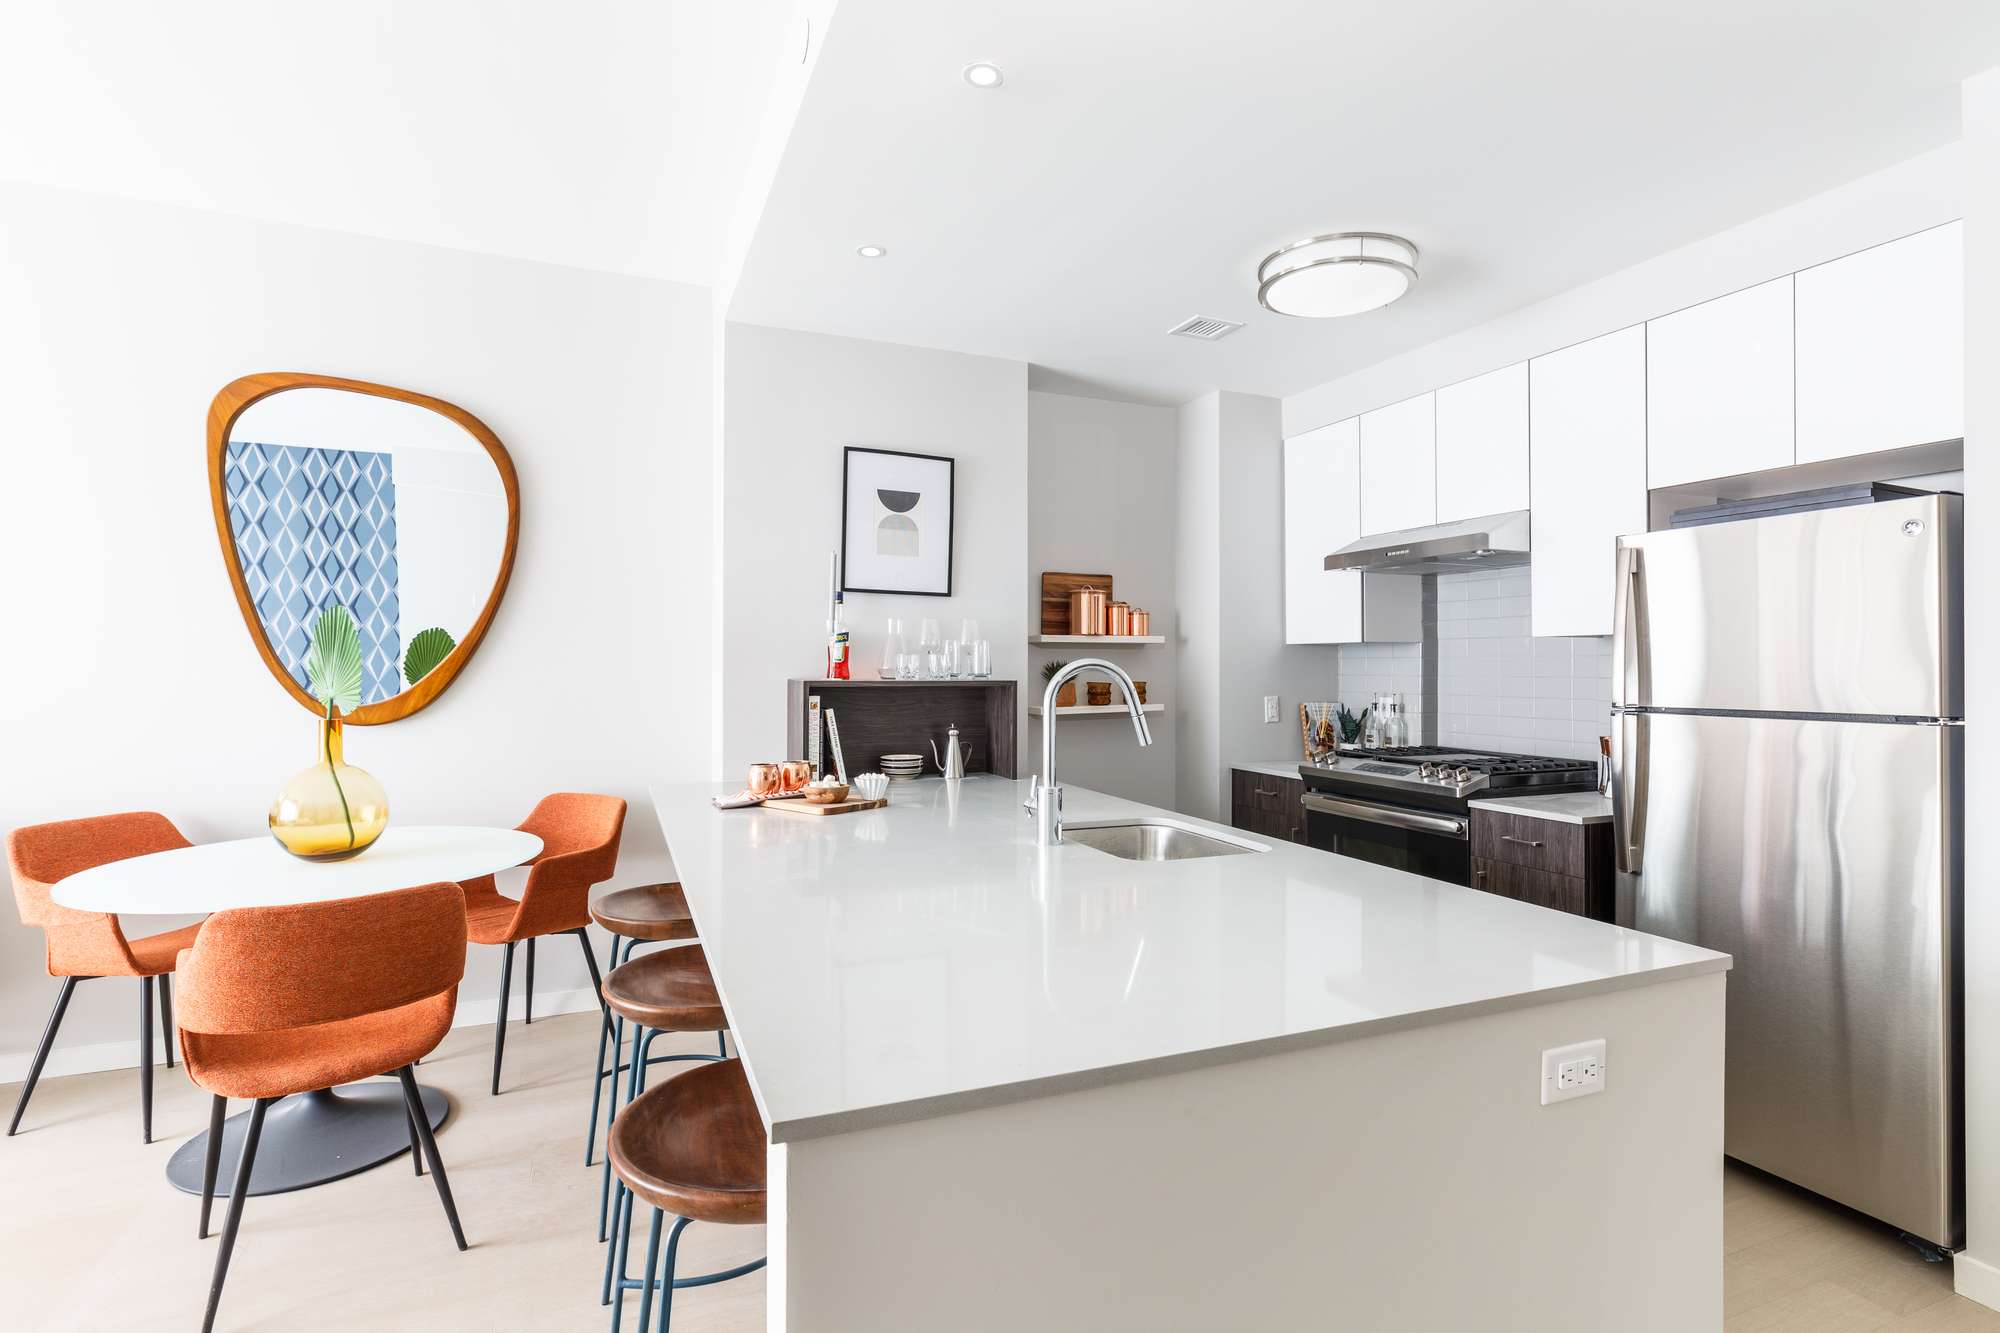 Bright, modern galley kitchen with light cabinets and large counter with bart stool seating, stainless steel appliances, and small round dining table